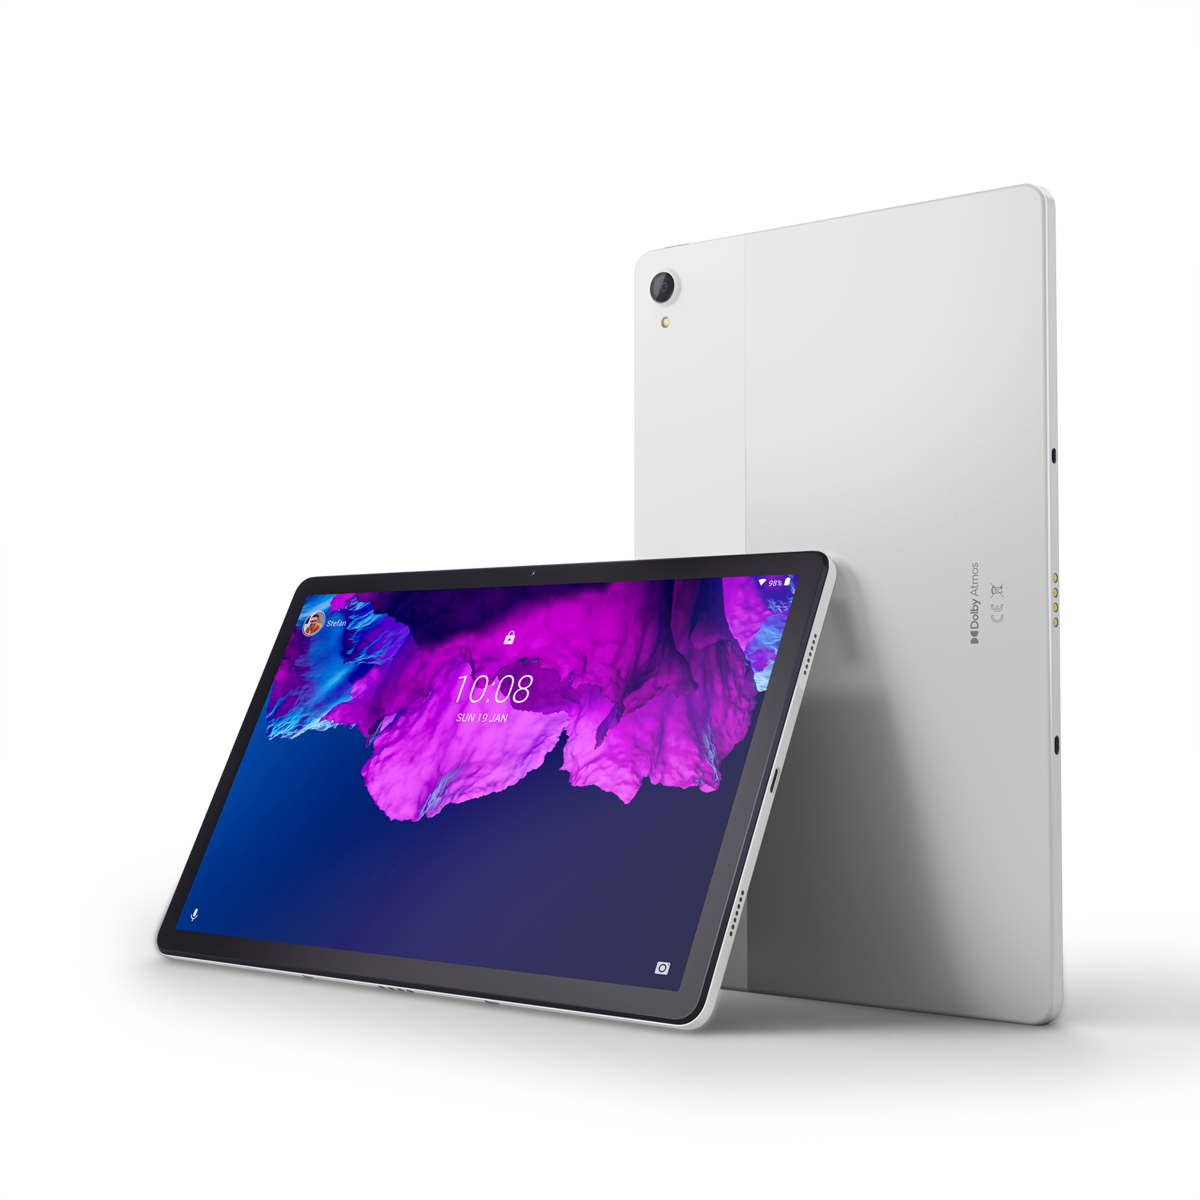 Lenovo Tab P11 powered by Snapdragon 662 is a cut-down version of the